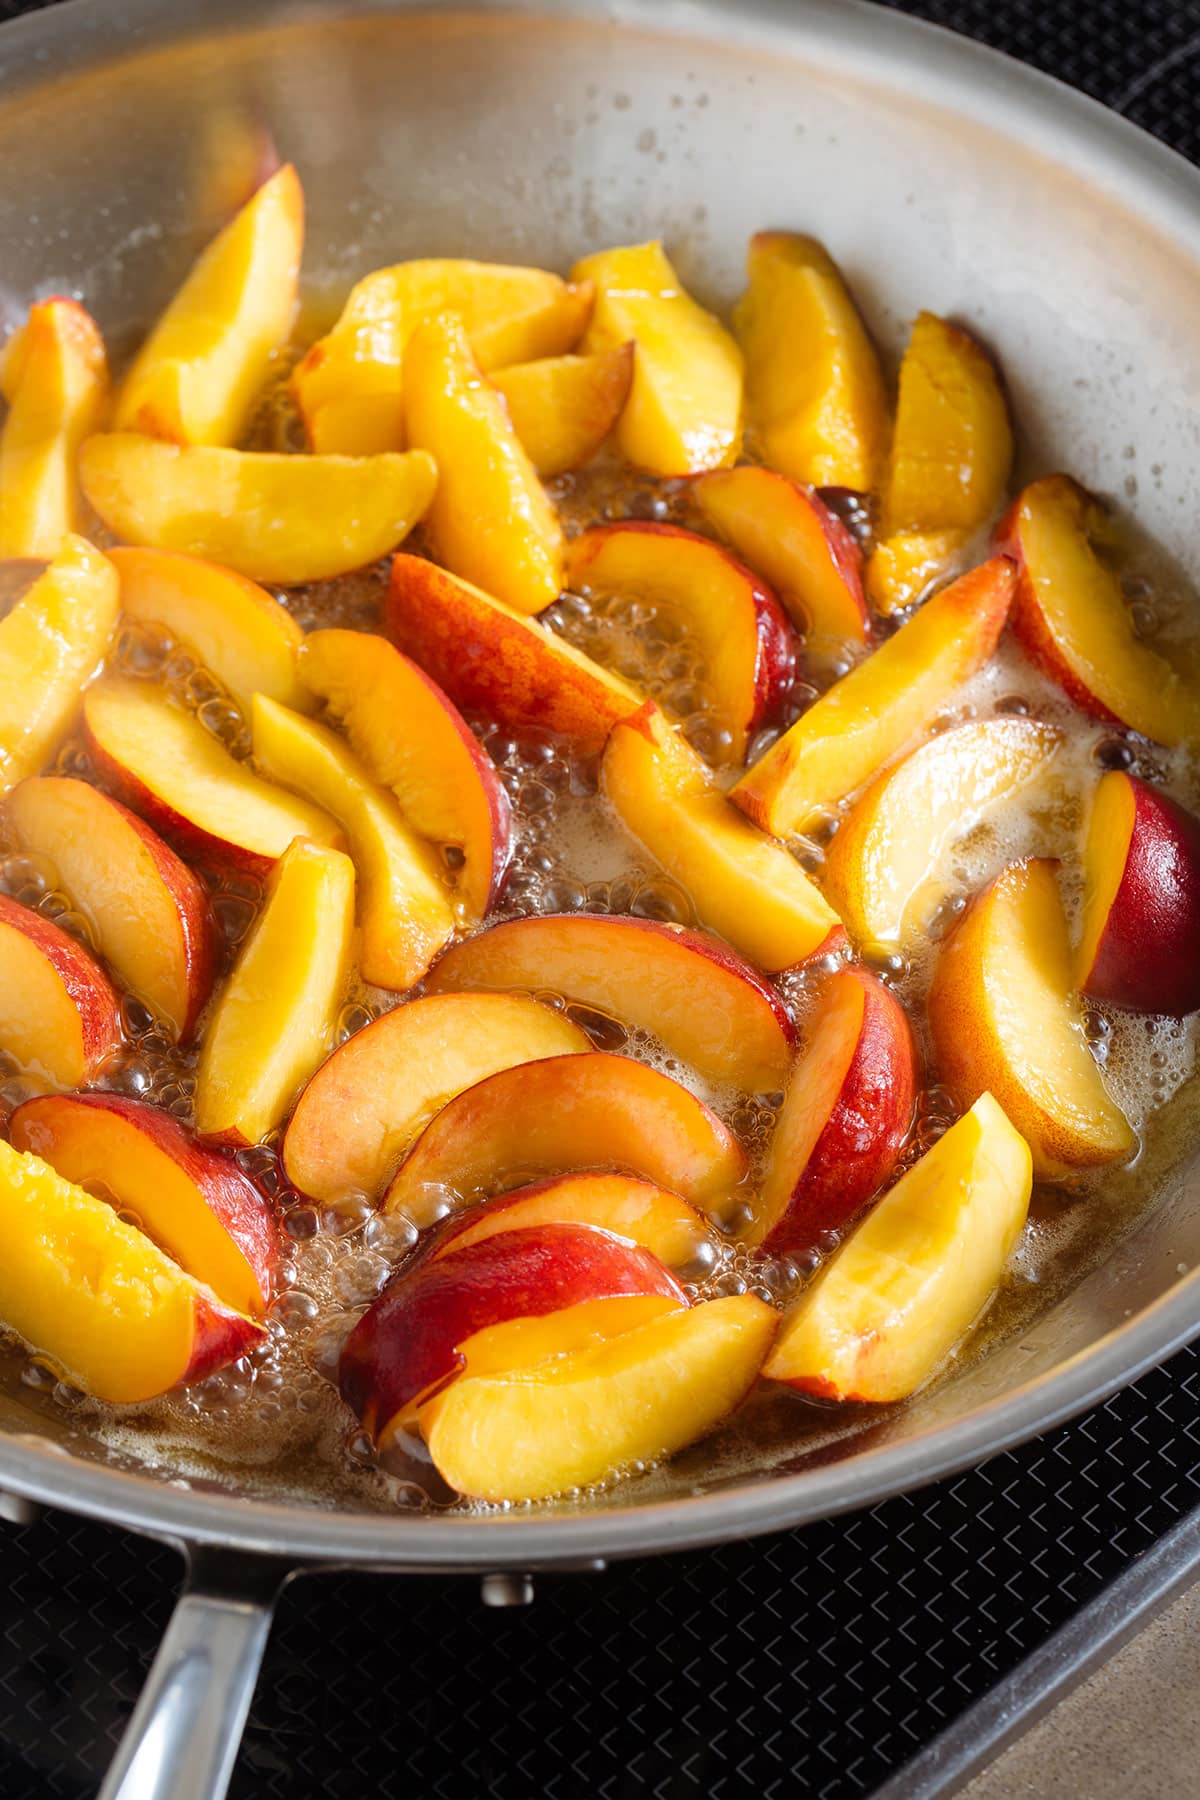 Sliced peaches cooking in a large pan with butter and maple syrup.